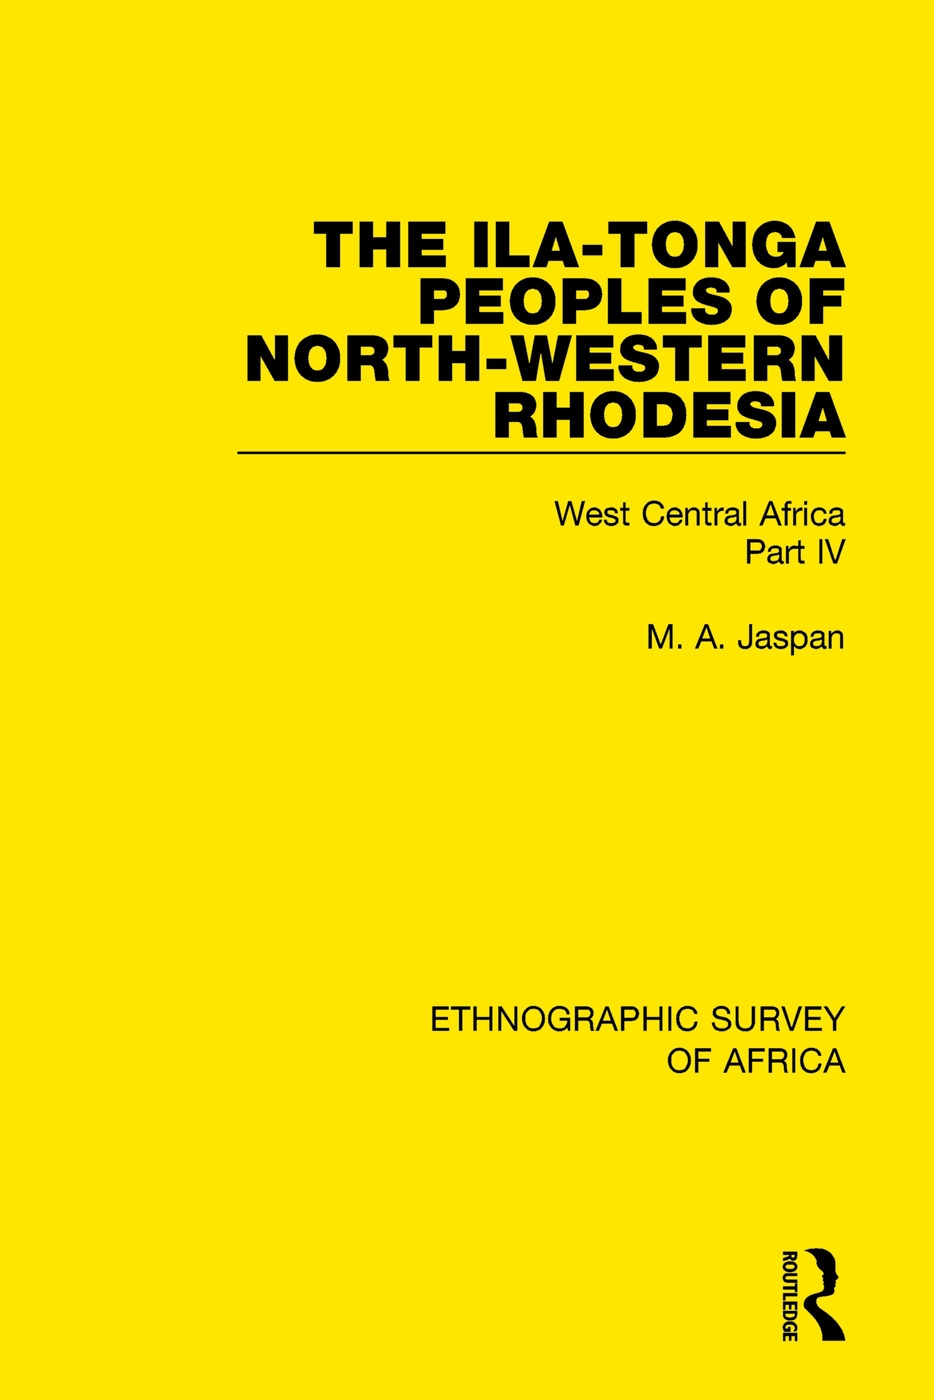 The Ila-Tonga Peoples of North-Western Rhodesia: West Central Africa Part IV